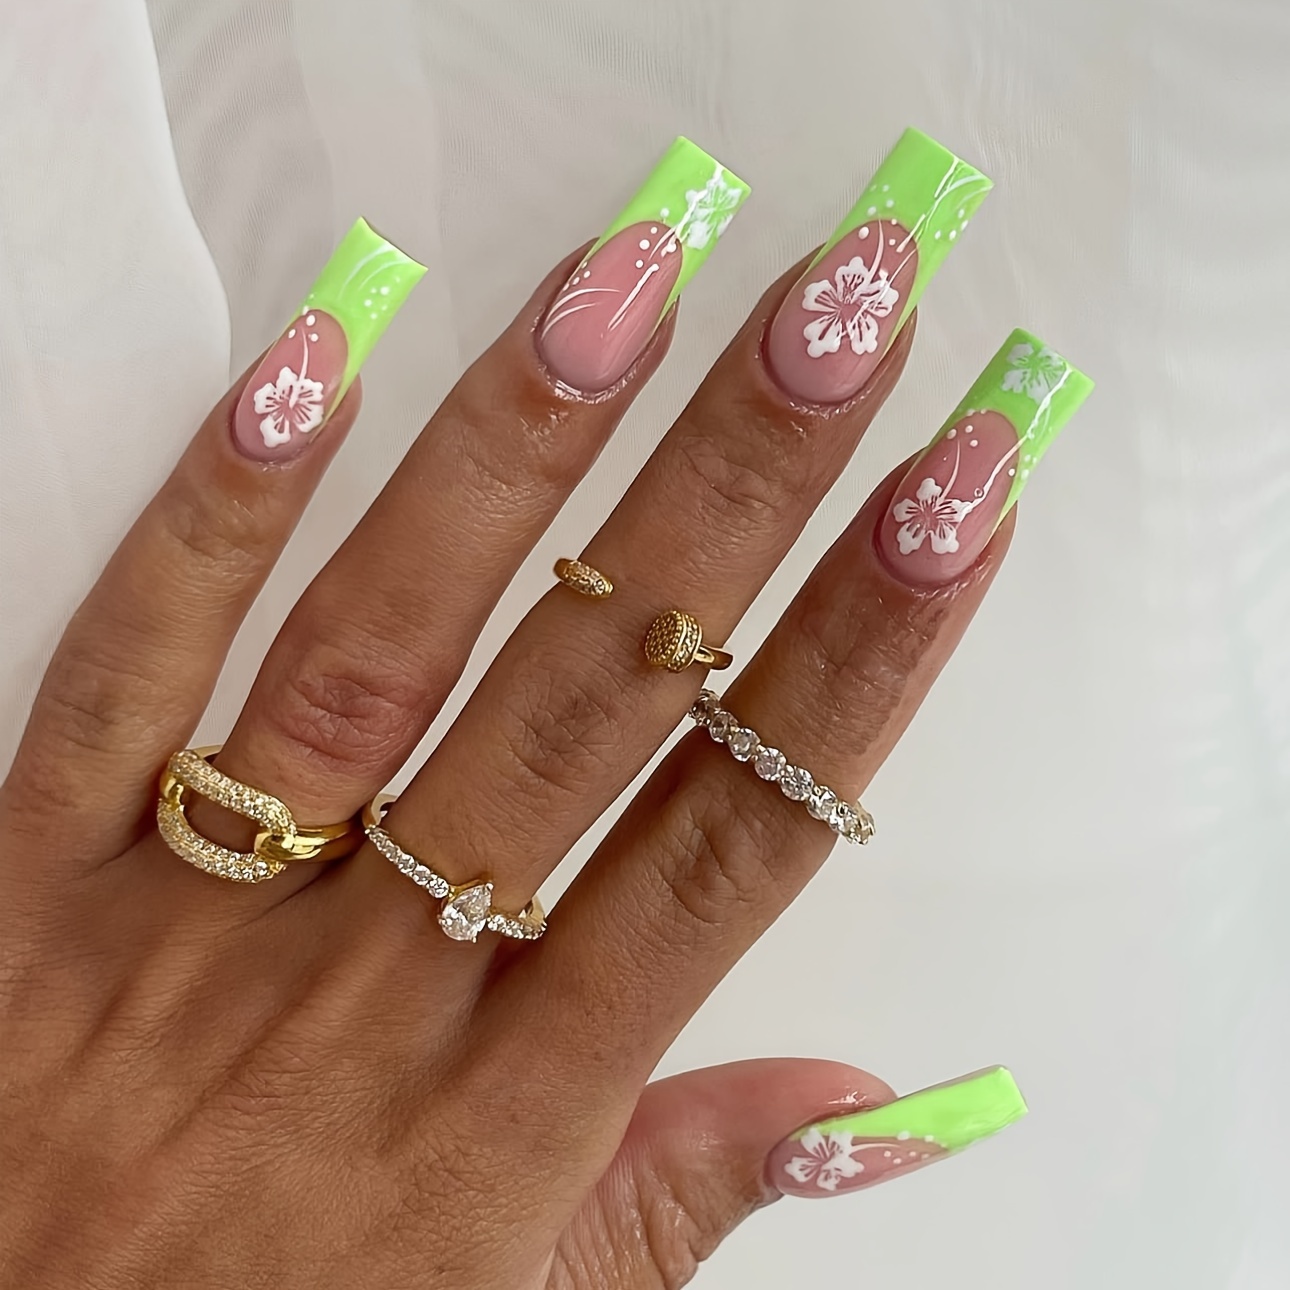 Come on Lime Green, neon green nail stamping polish, available in the USA  at www.lanternandwren.